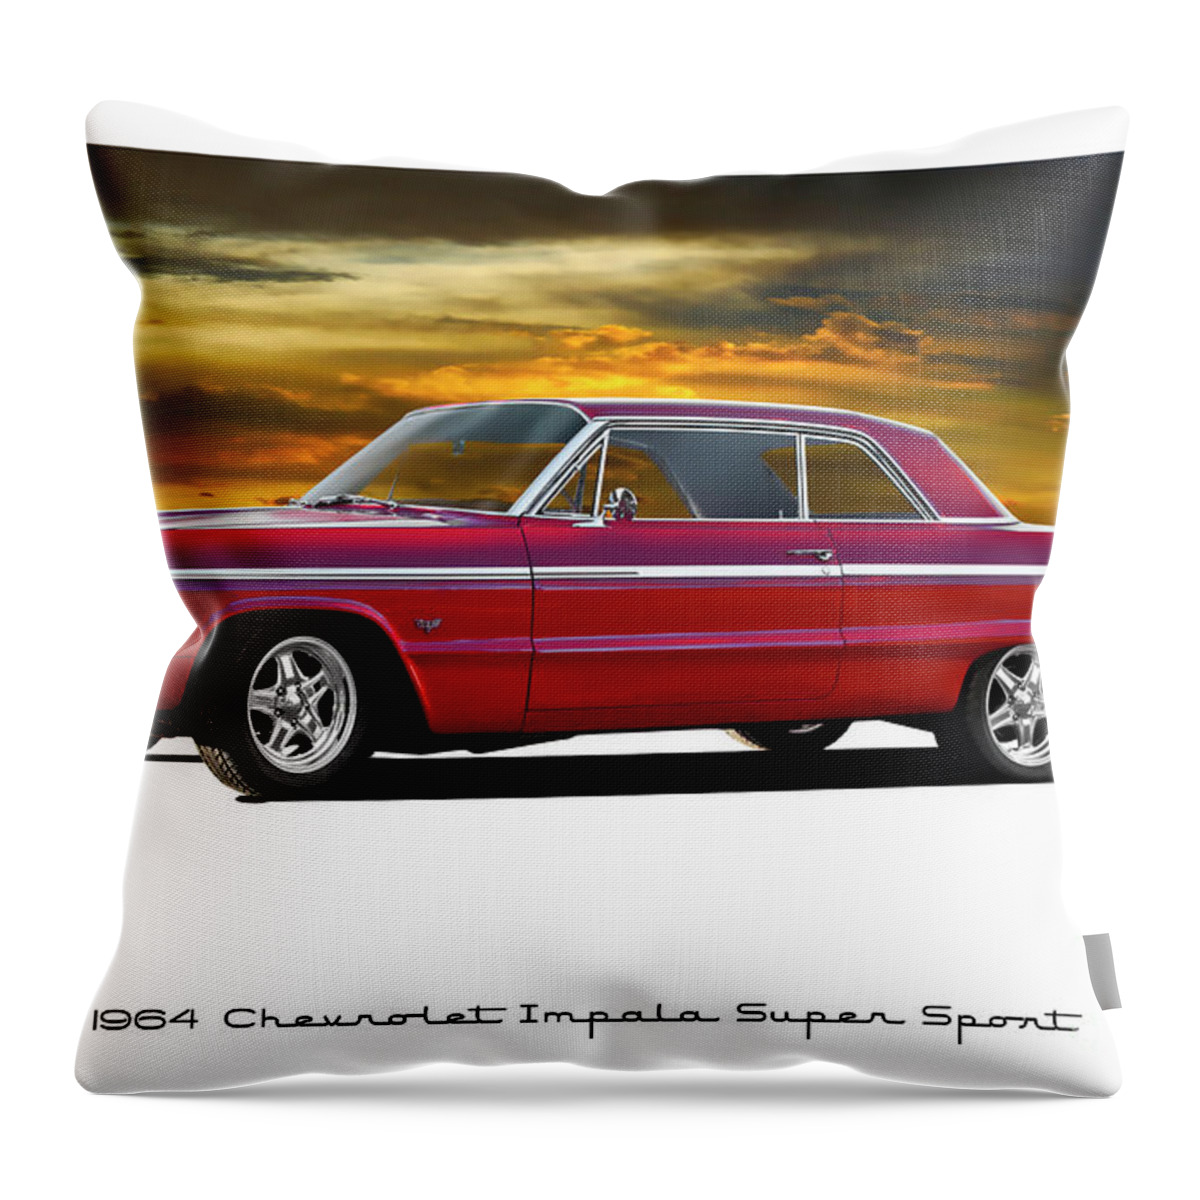 1964 Chevrolet Impala Ss Throw Pillow featuring the photograph 1964 Chevrolet Impala SS by Dave Koontz